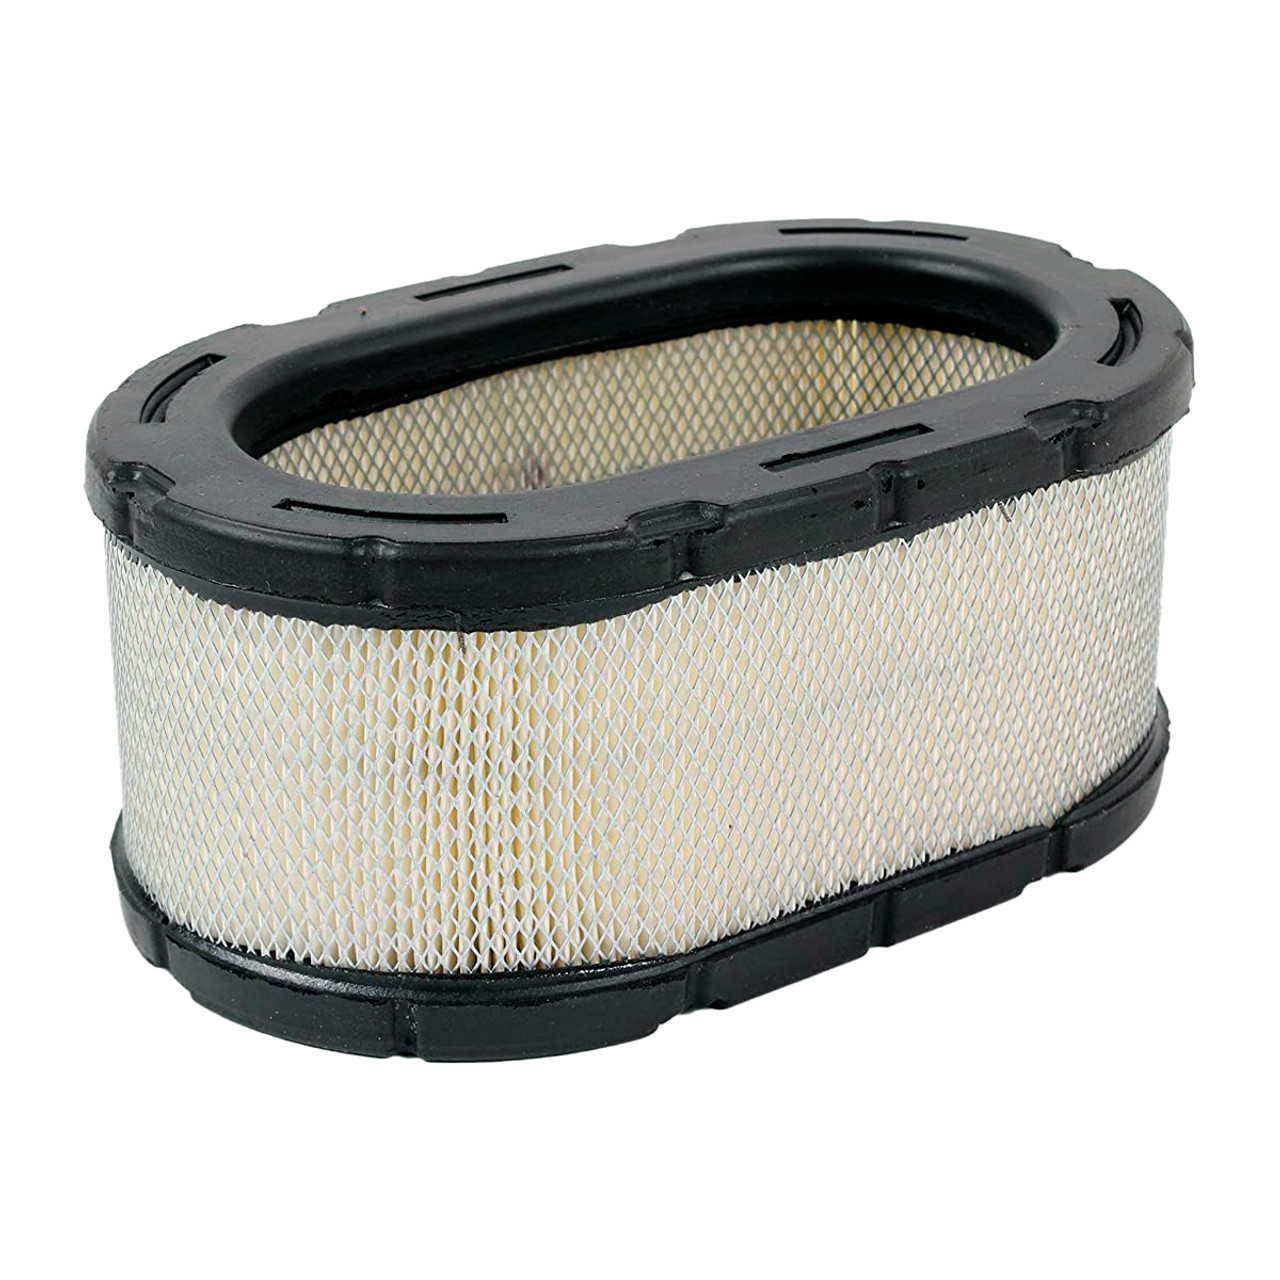 RAParts Air Filter for Ariens Gravely Zero Turn Mower Replaces 21541600  fits Kohler Engine